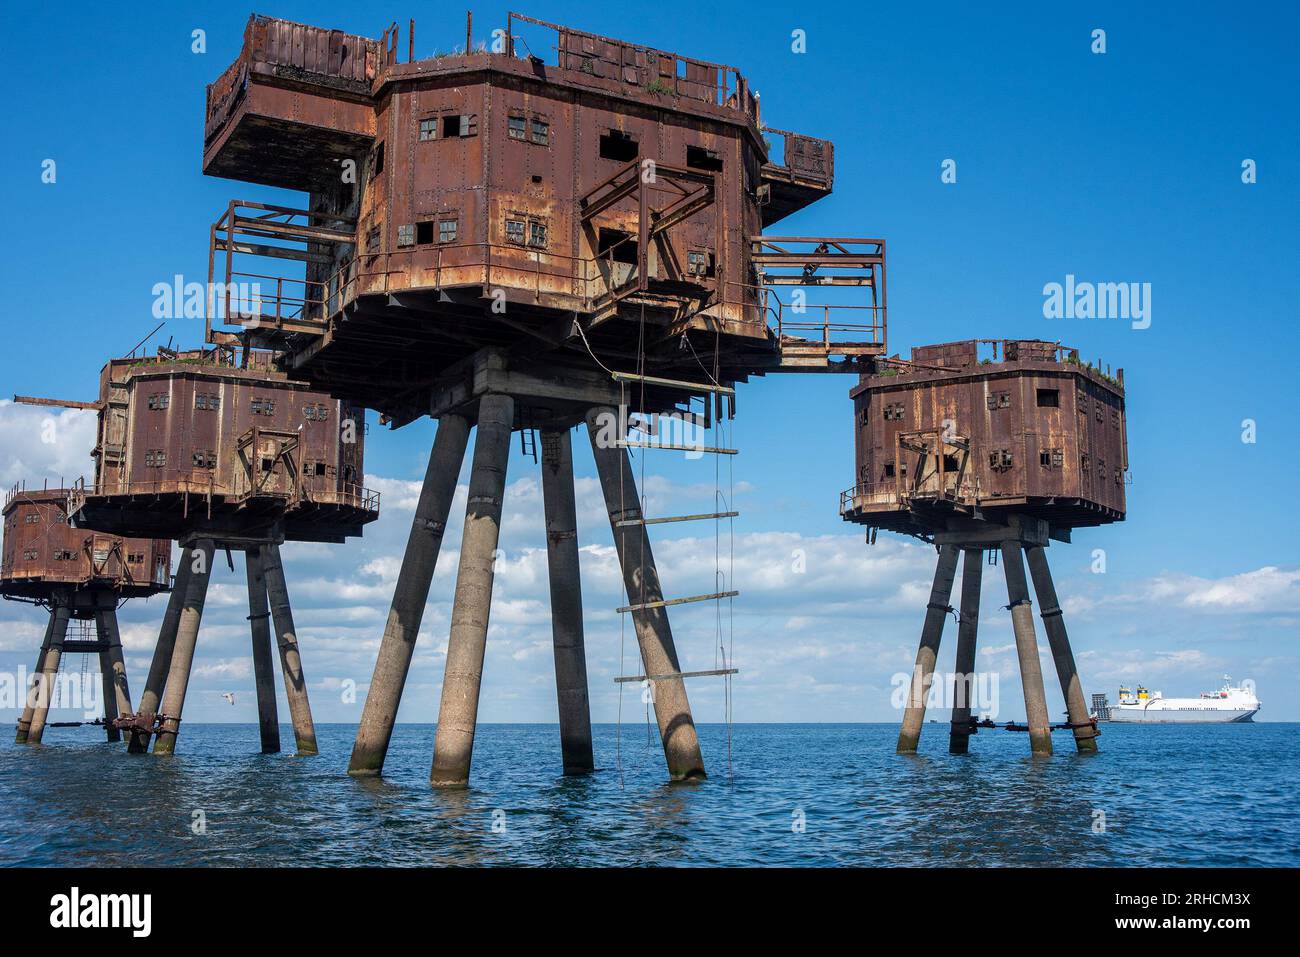 The Maunsell Forts seen with very serious structural defects and many of their parts fallen into the sea. Nowadays only the seagulls nest in them. A ferry boat is visible at the distance as this water is not safe for boating. The Maunsell Forts are armed towers built at the Thames and the Mersey Estuaries during the Second World War to defend the United Kingdom. They have been built 1942 - 1943 for anti-aircraft defense and to report to London about the German aircraft. They are all named after the designer Guy Maunsell. (Photo by Krisztian Elek/SOPA Images/Sipa USA) Stock Photo